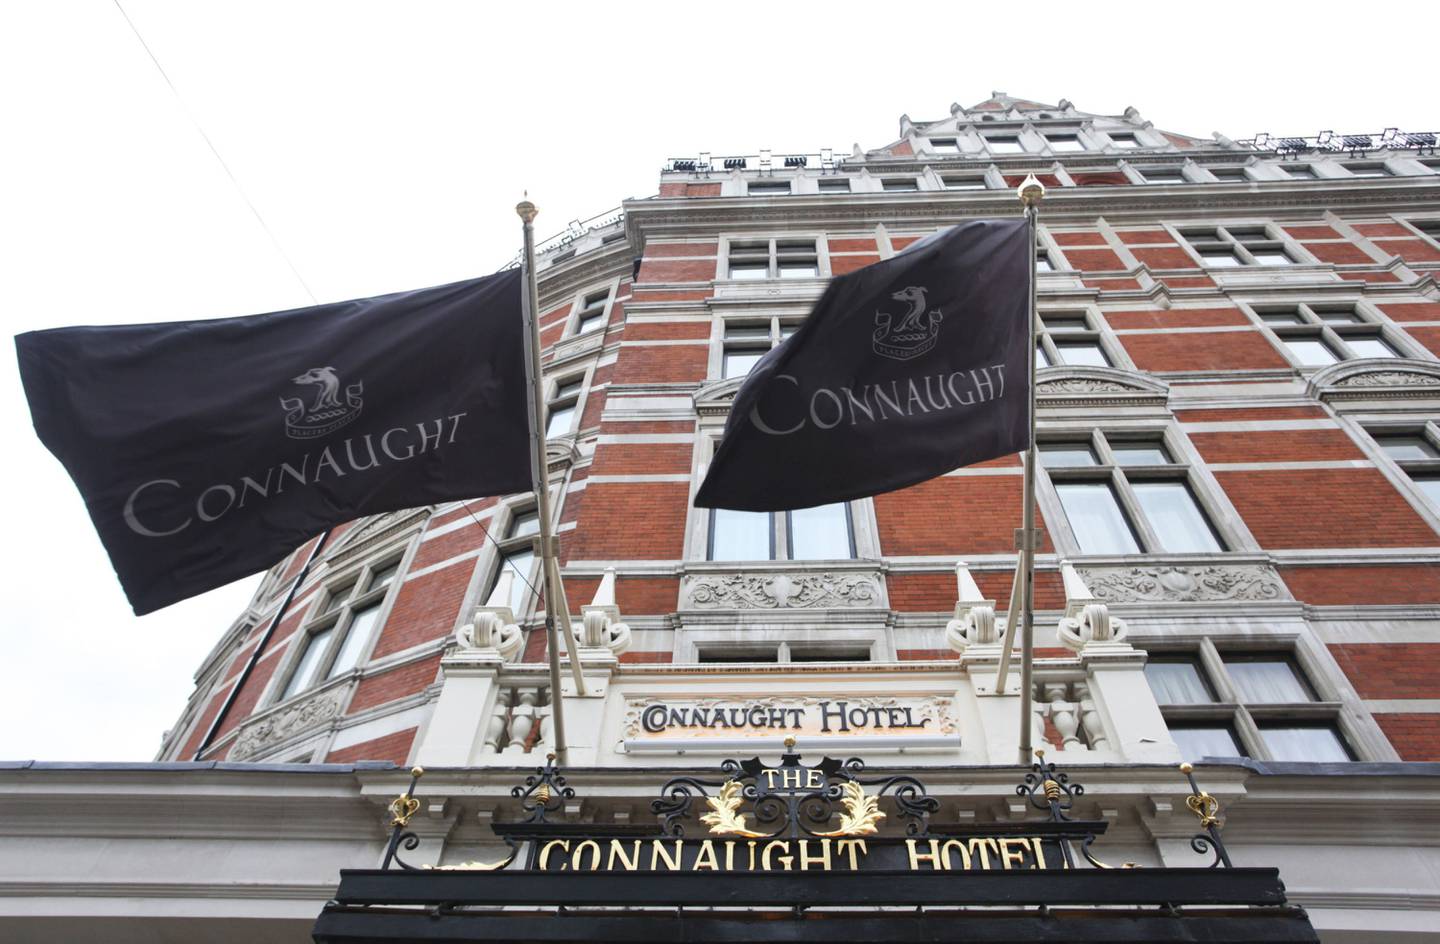 Connaught hotel